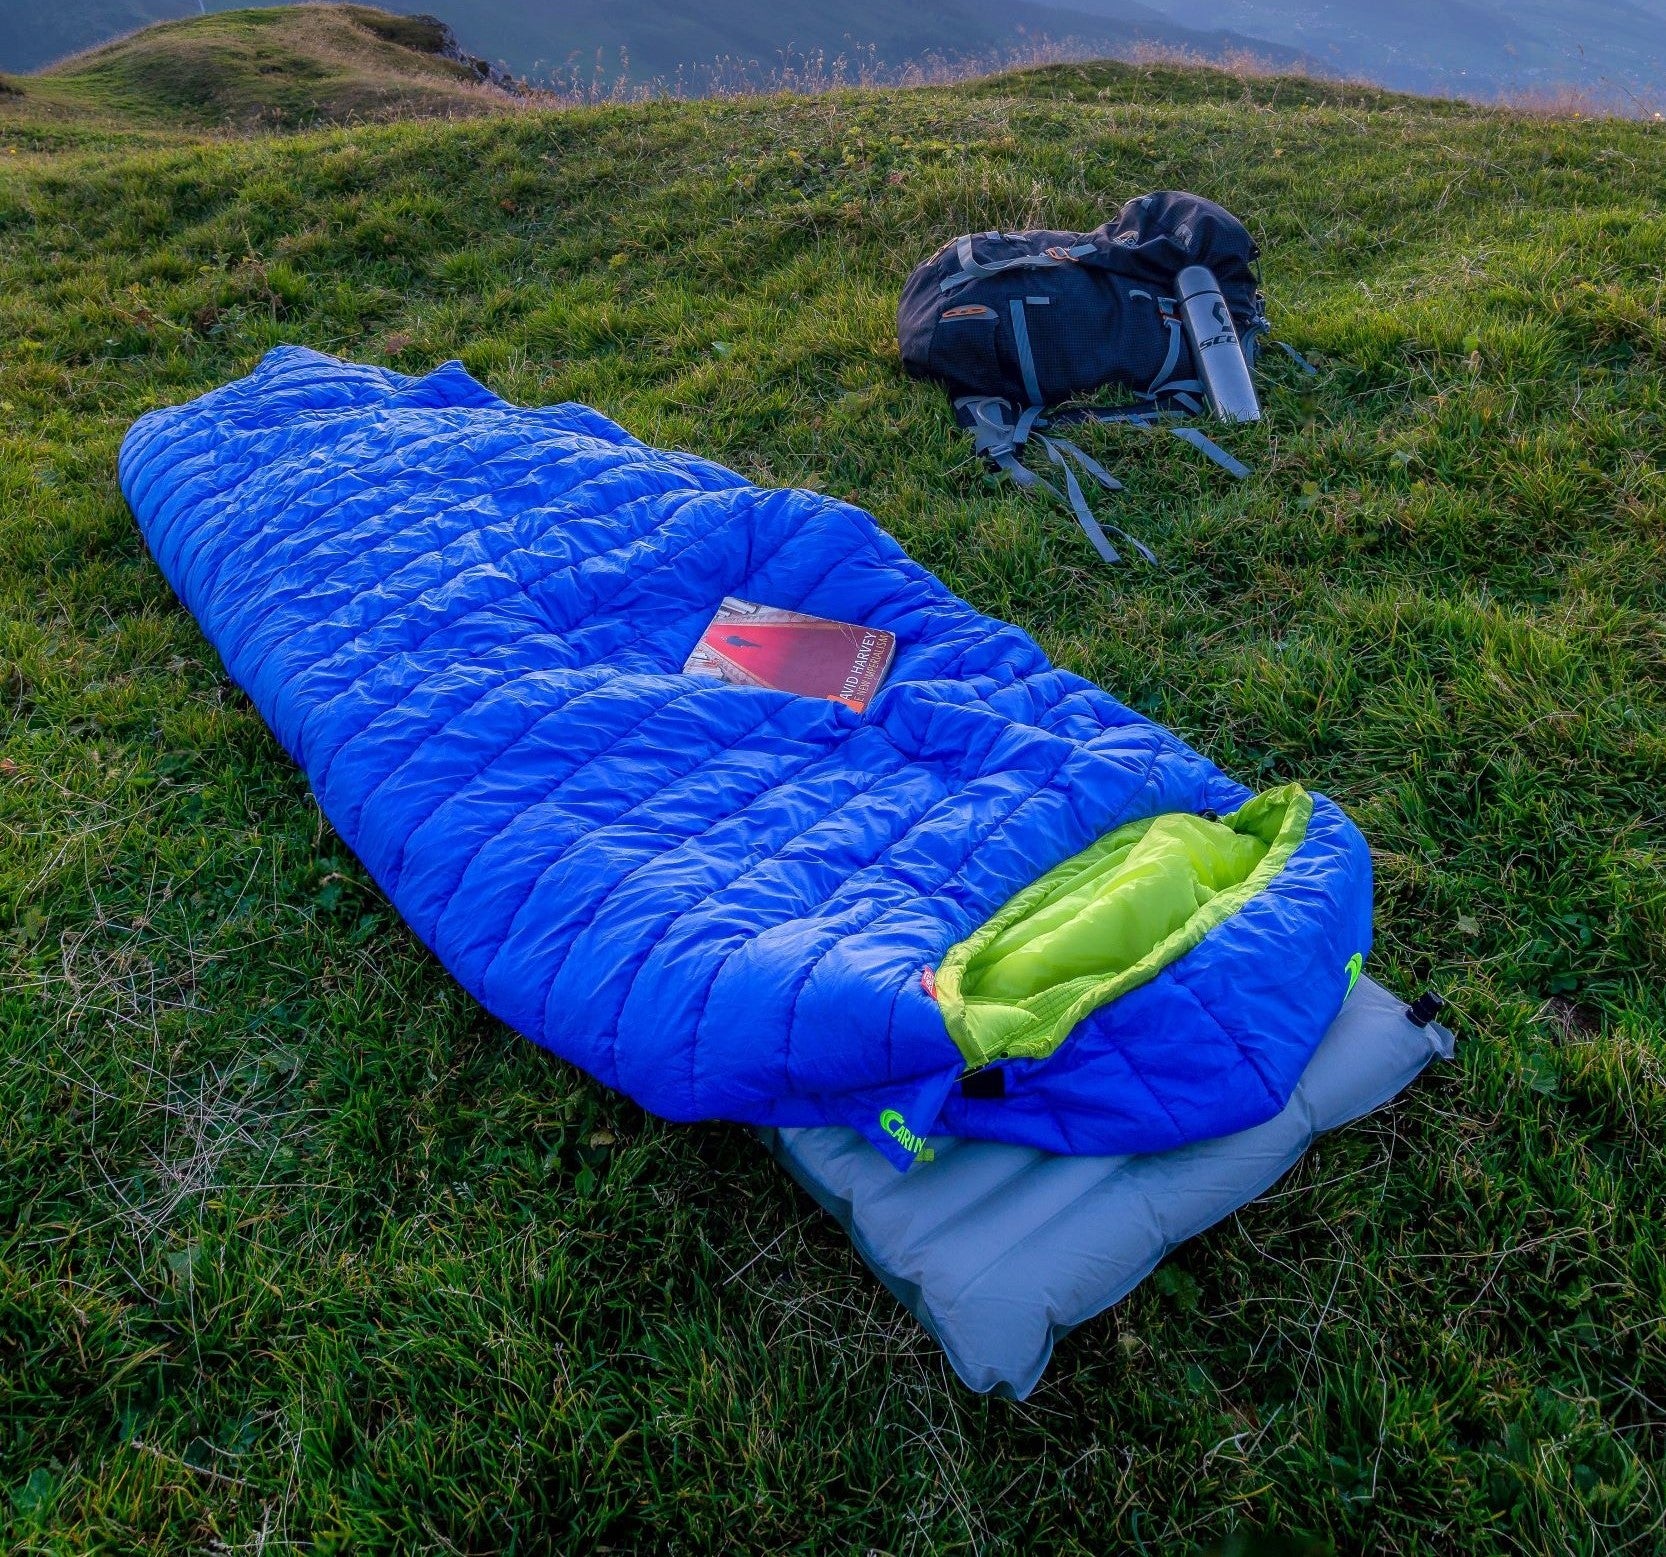 Wholesale Sleeping Bags for Camping and Donations Alike